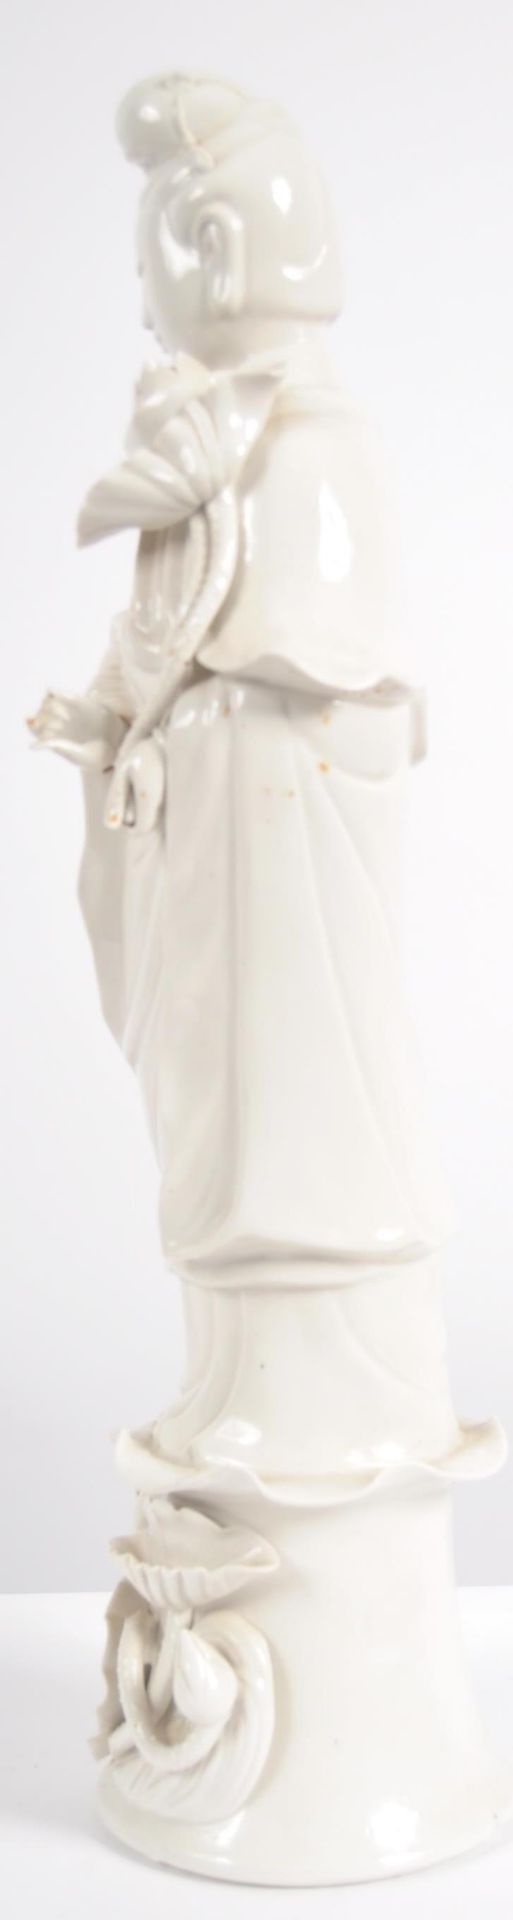 LARGE EARLY 20TH CENTURY CHINESE GUANYIN FIGURE - Image 5 of 9